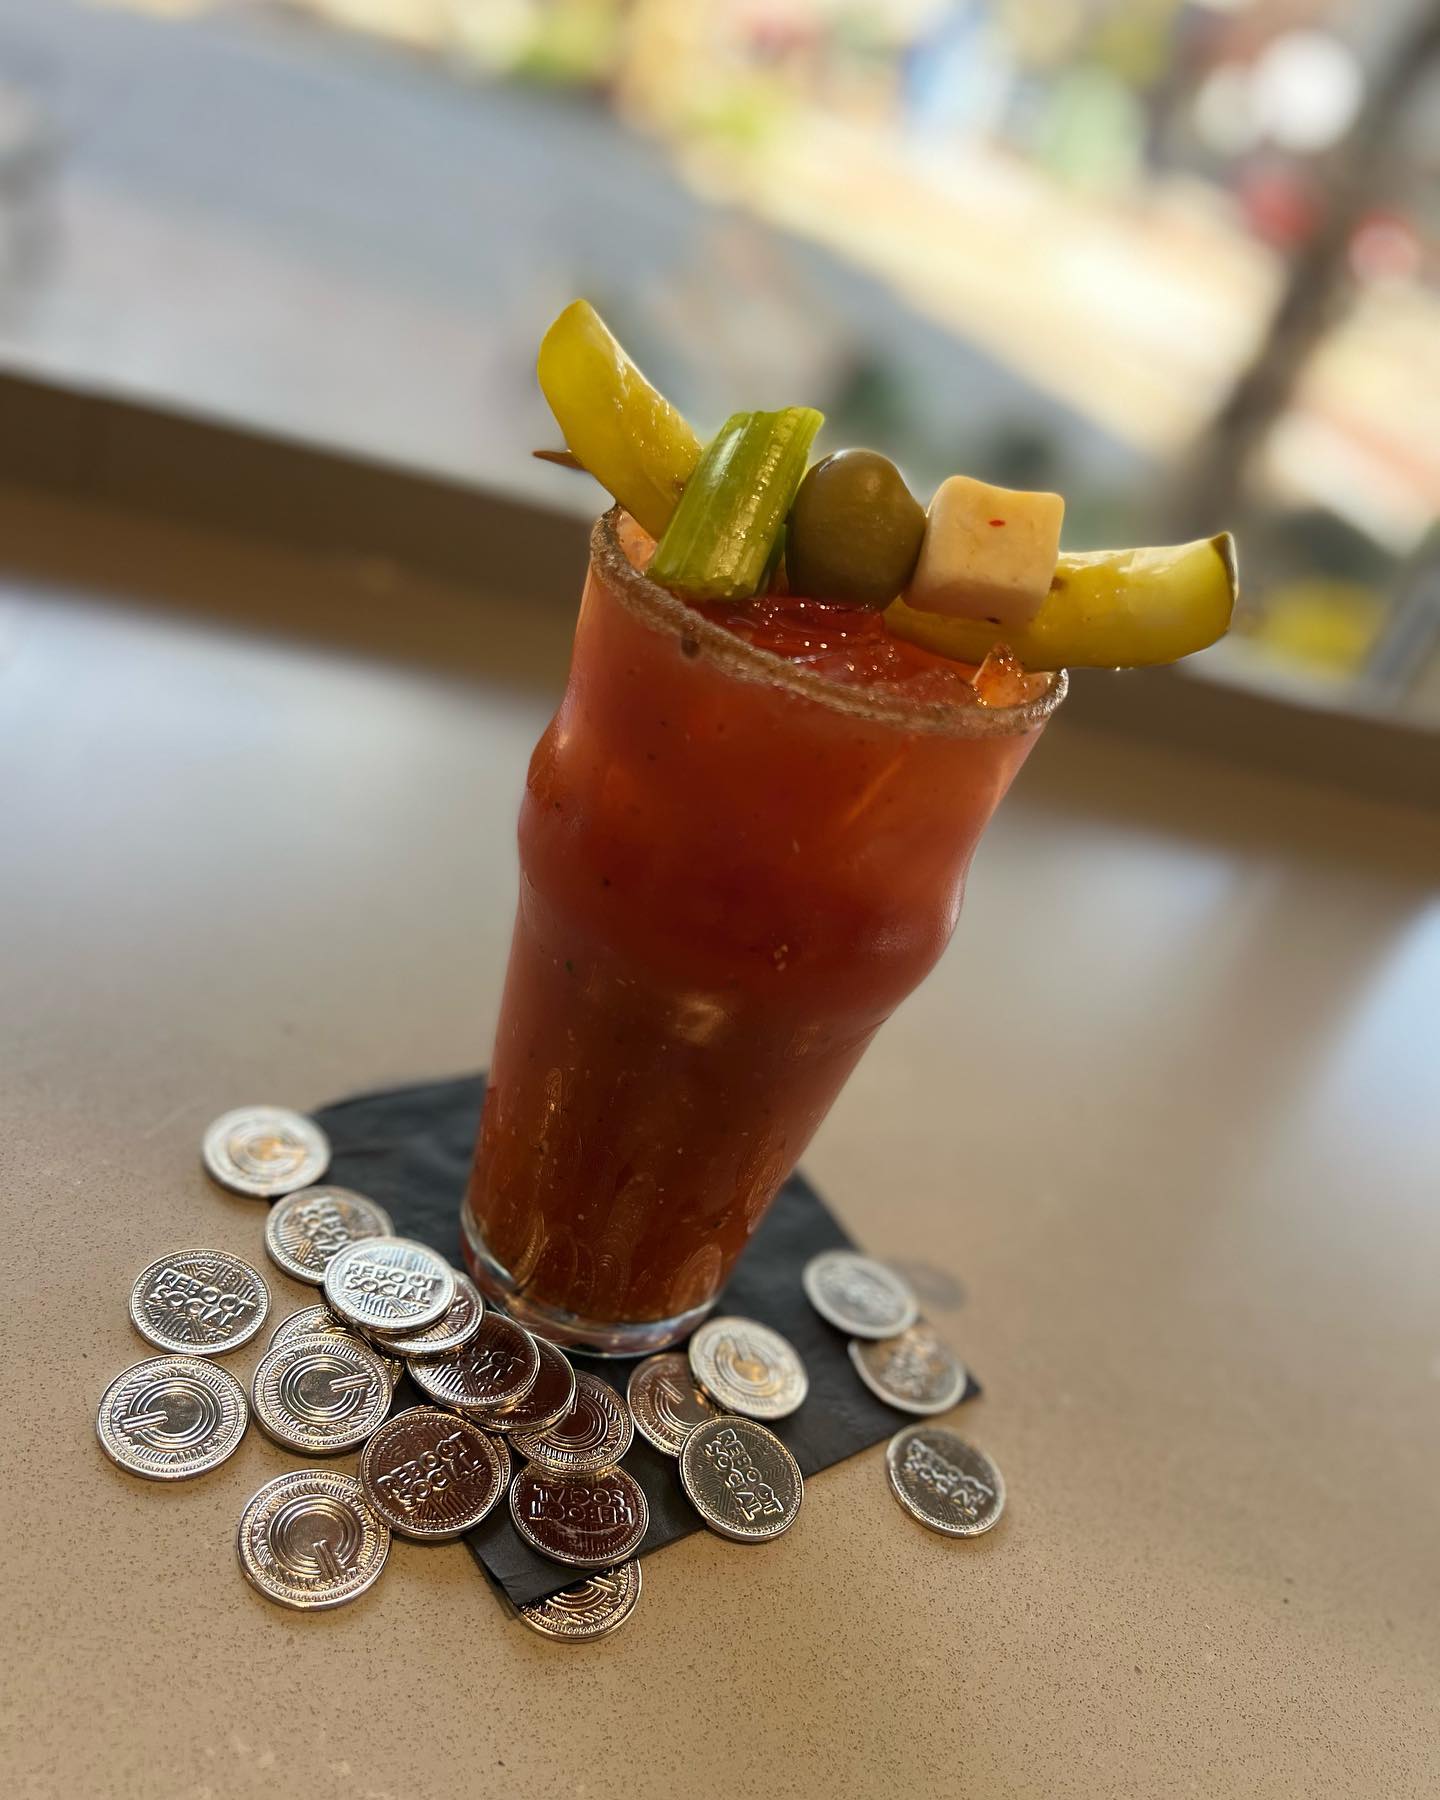 Did someone say it’s Sunday?! Our NFL Game Day Special has returned once again! Stop in for $4.50 Bloody Mary’s, $3.25 16oz Domestic Tall Boys, and $7 Cauliflower Poppers, Cheese Curds, and Chips ‘N’ Dip.